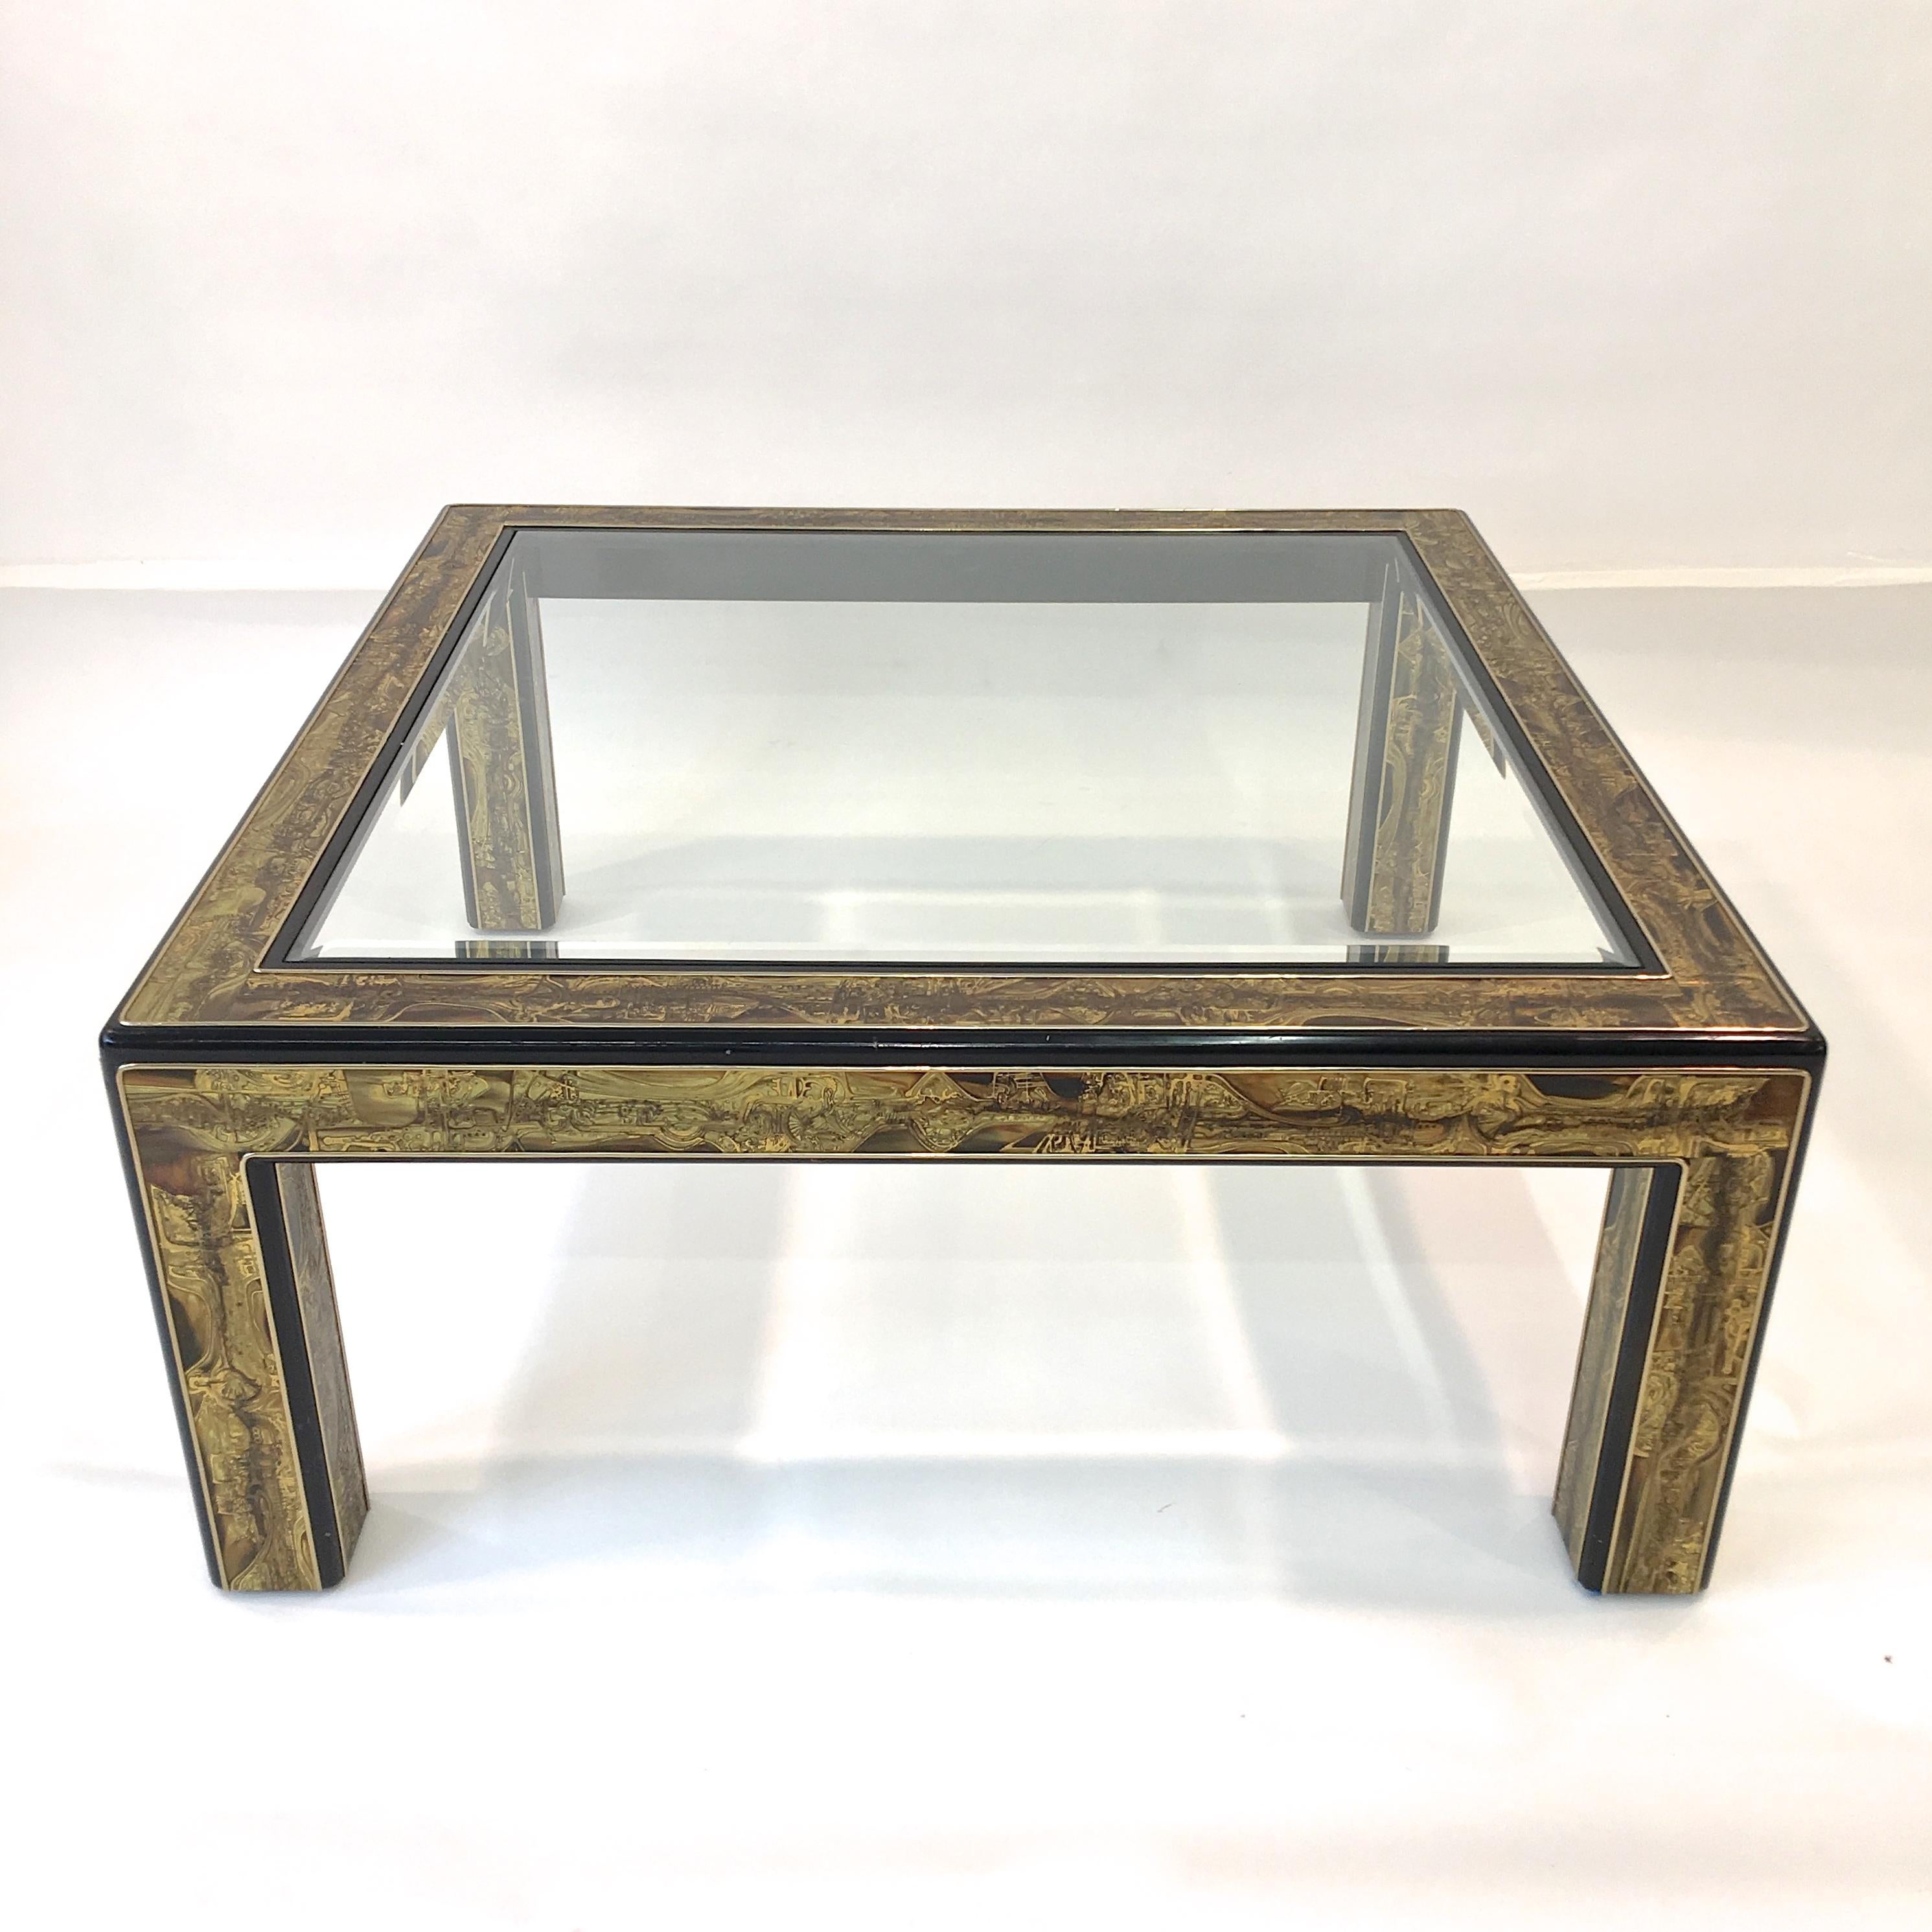 A square cocktail table created by metal sculptor Bernhard Rohne for Mastercraft circa 1970 in acid etched brass with ebonized wood and inset bevelled glass top.

See dining table version in late 1970s issue of H&G magazine: image # 20.

From